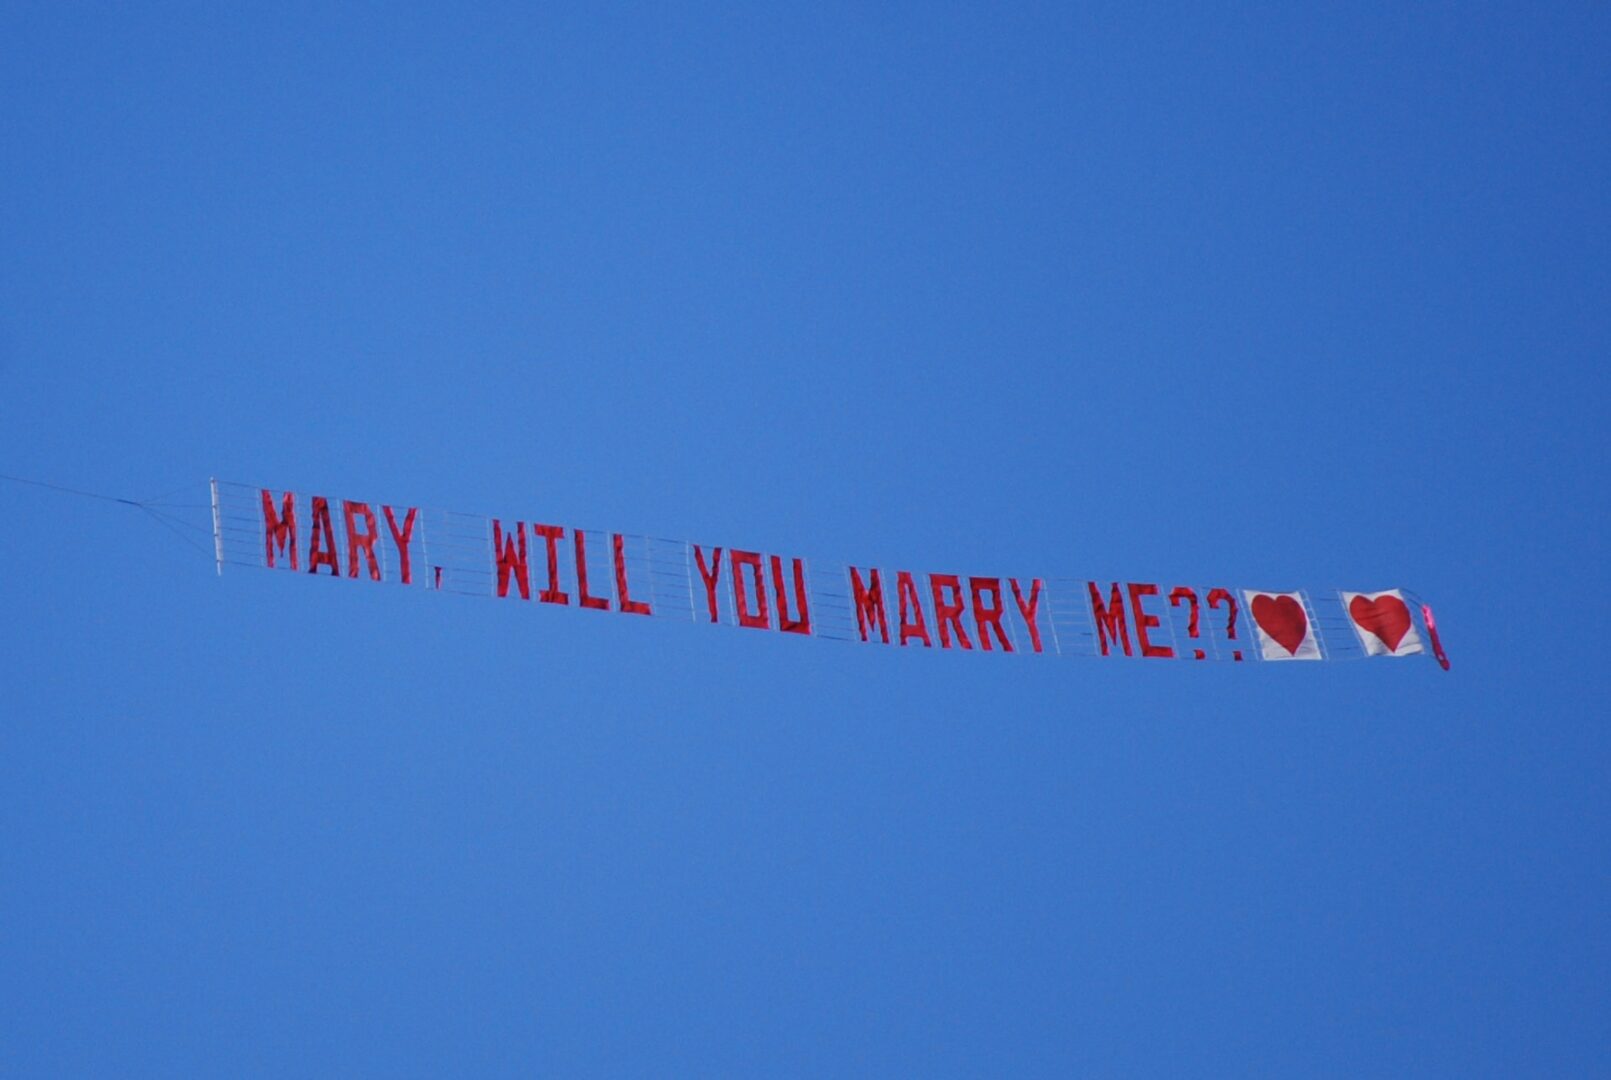 A banner that says marry, will you marry me ?